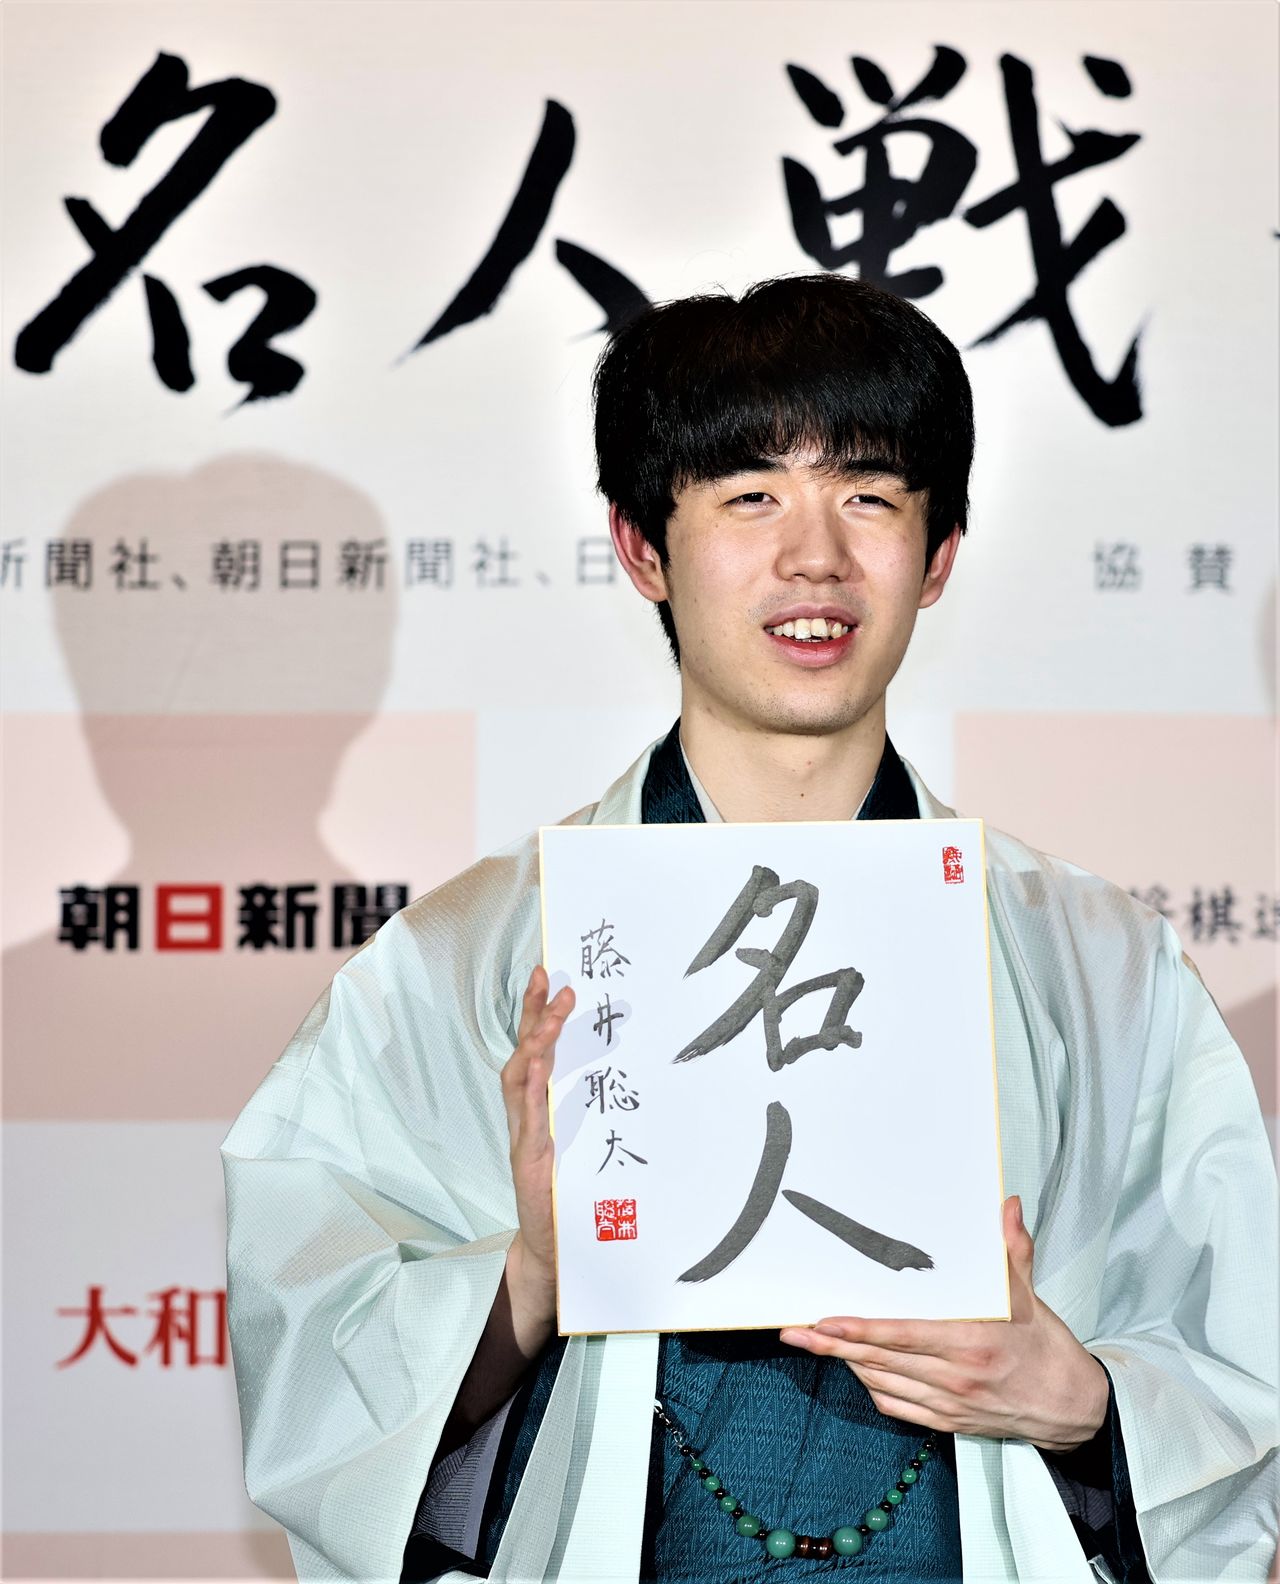 Fujii Sōta holds a card reading “Meijin” at a press conference after winning the title of the same name in Takayama, Nagano Prefecture, on June 1, 2023. (© Jiji)